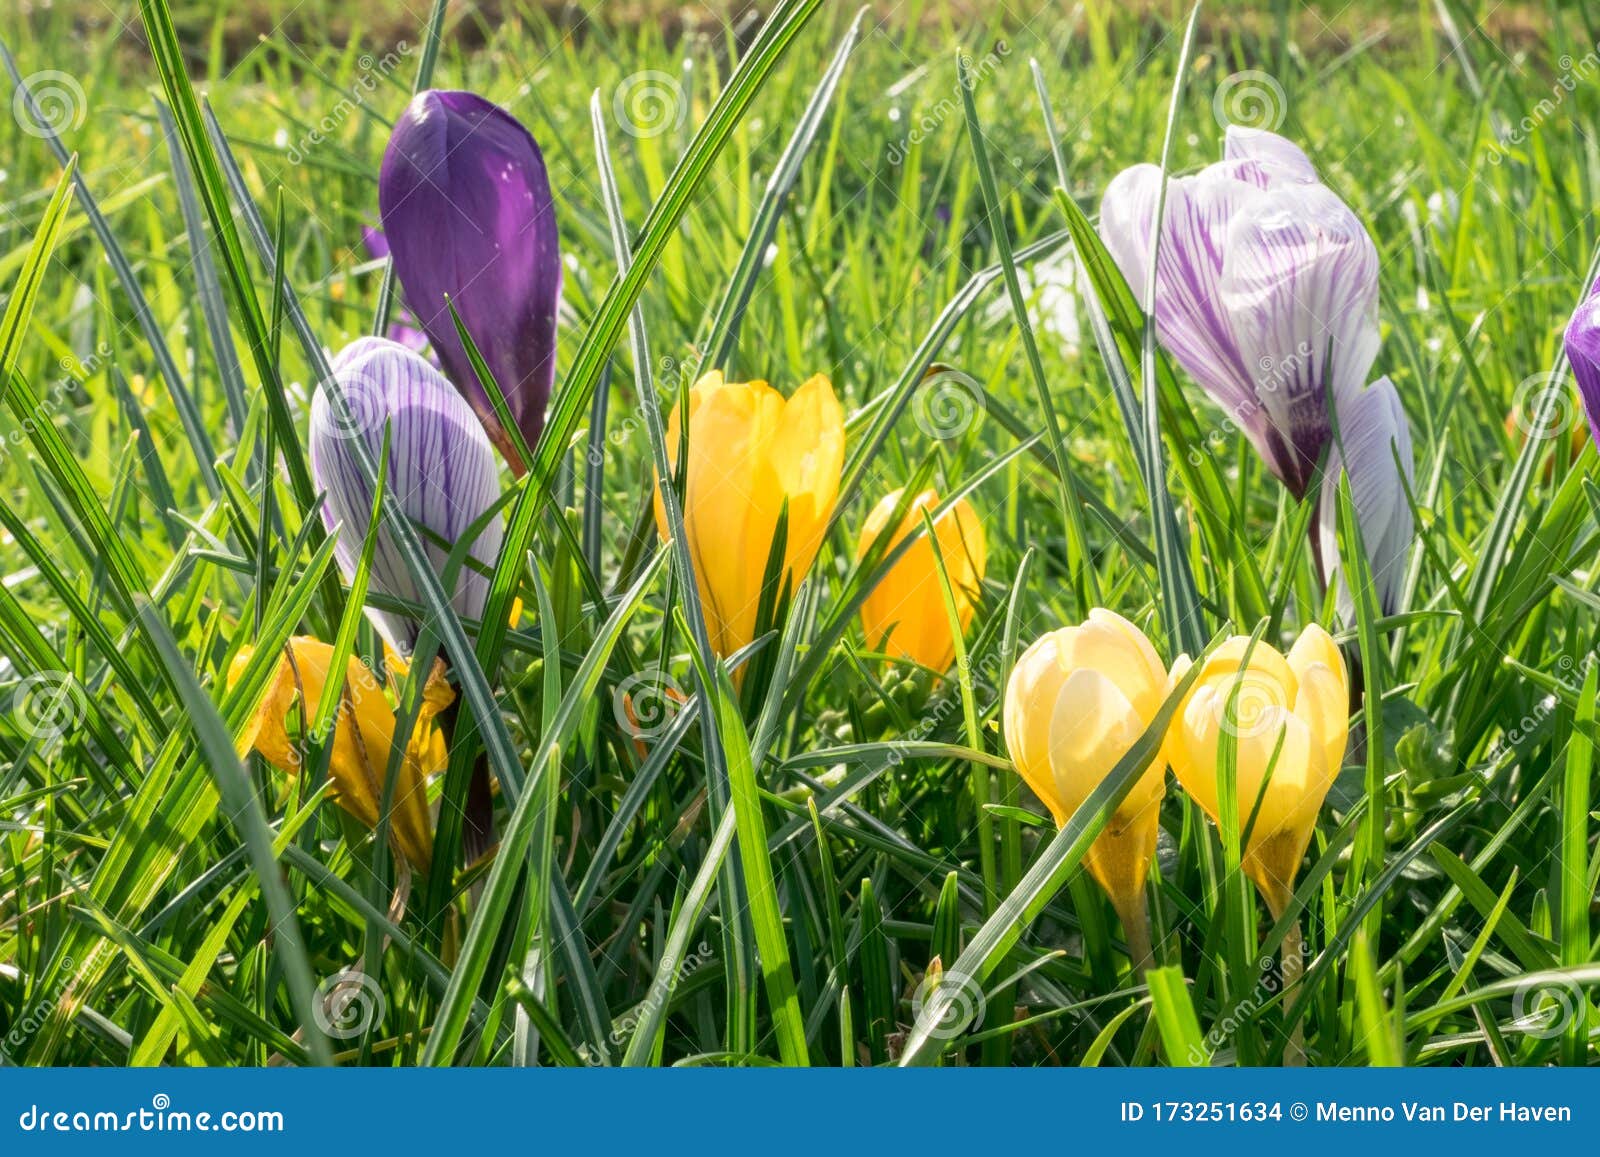 Close Up Of Crocus Flowers In Yellow And Violet Colors Stock Photo Image Of Background Beautiful 173251634